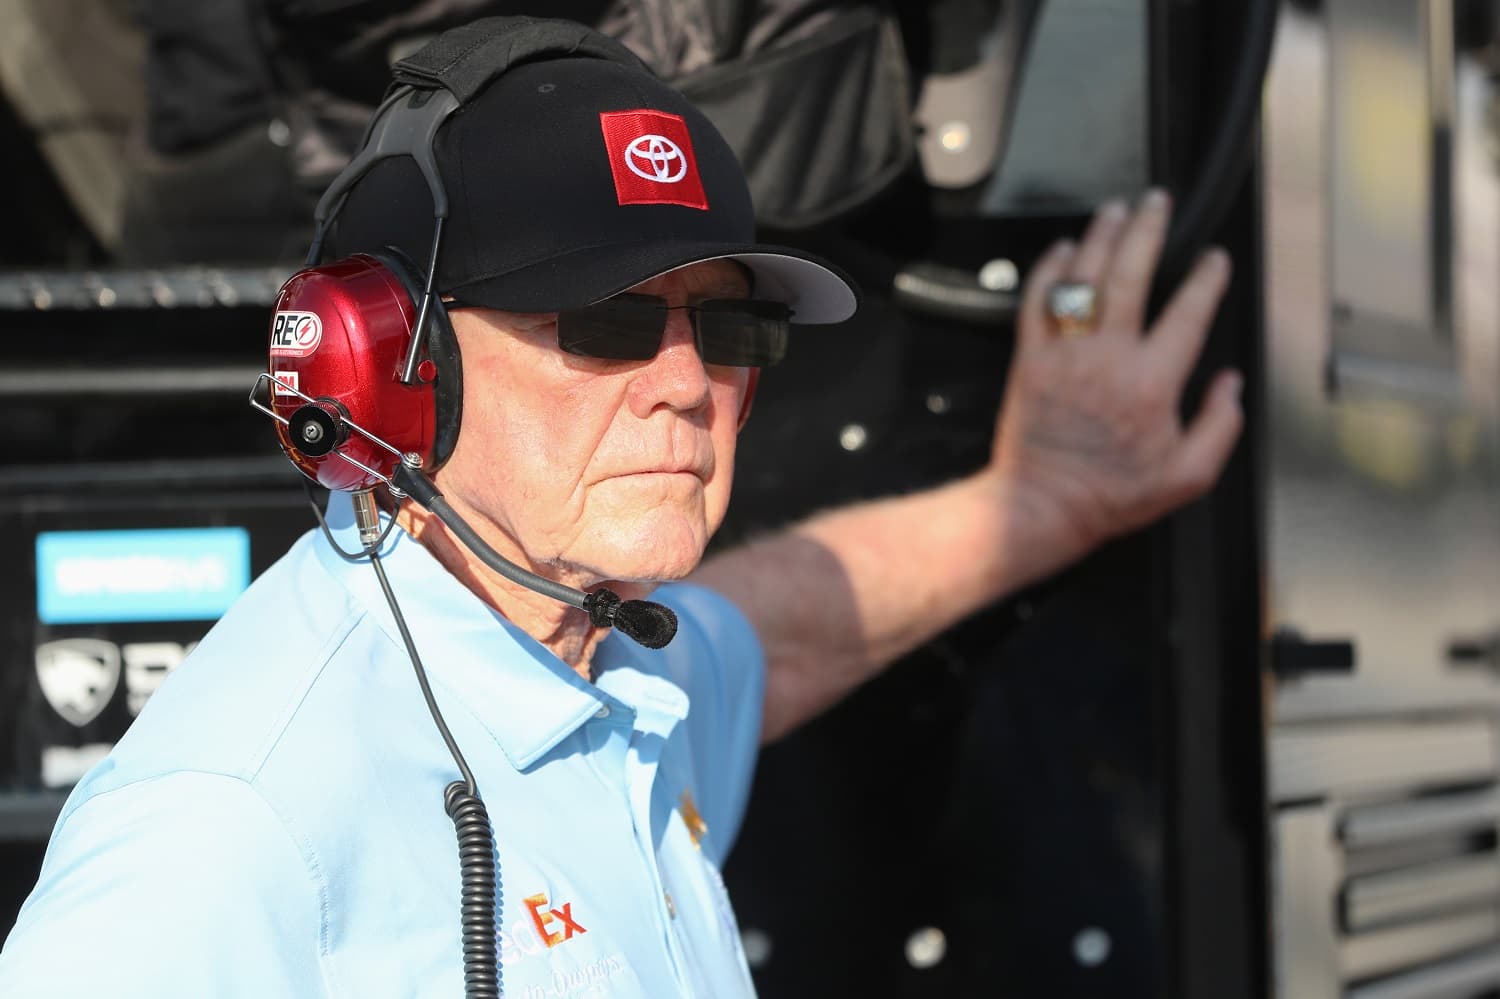 JGR team owner and Hall of Famer Joe Gibbs looks on during the NASCAR Cup Series Goodyear 400 at Darlington Raceway on May 14, 2023.